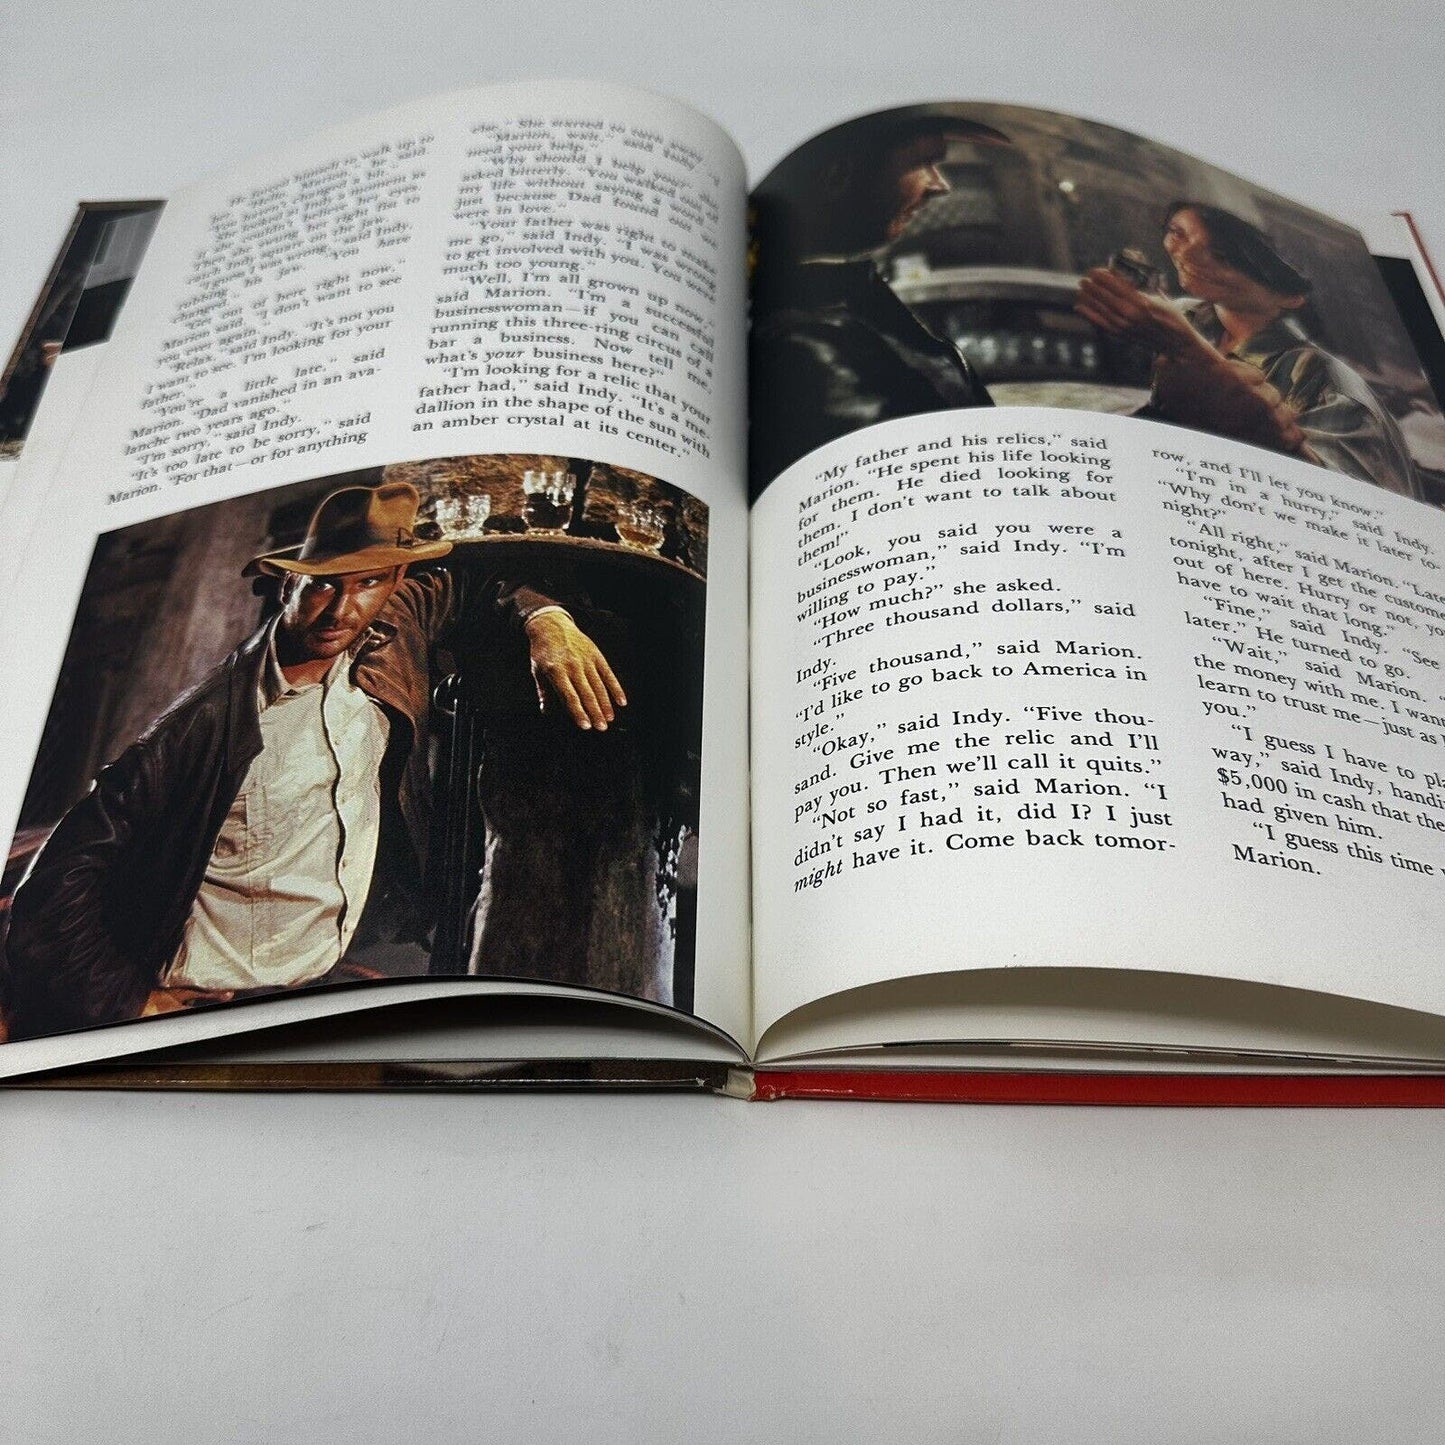 (First Edition) Raiders of the Lost Ark Indiana Jones 1981 Movie Storybook - Uncle Buddy's Beard & Used Books